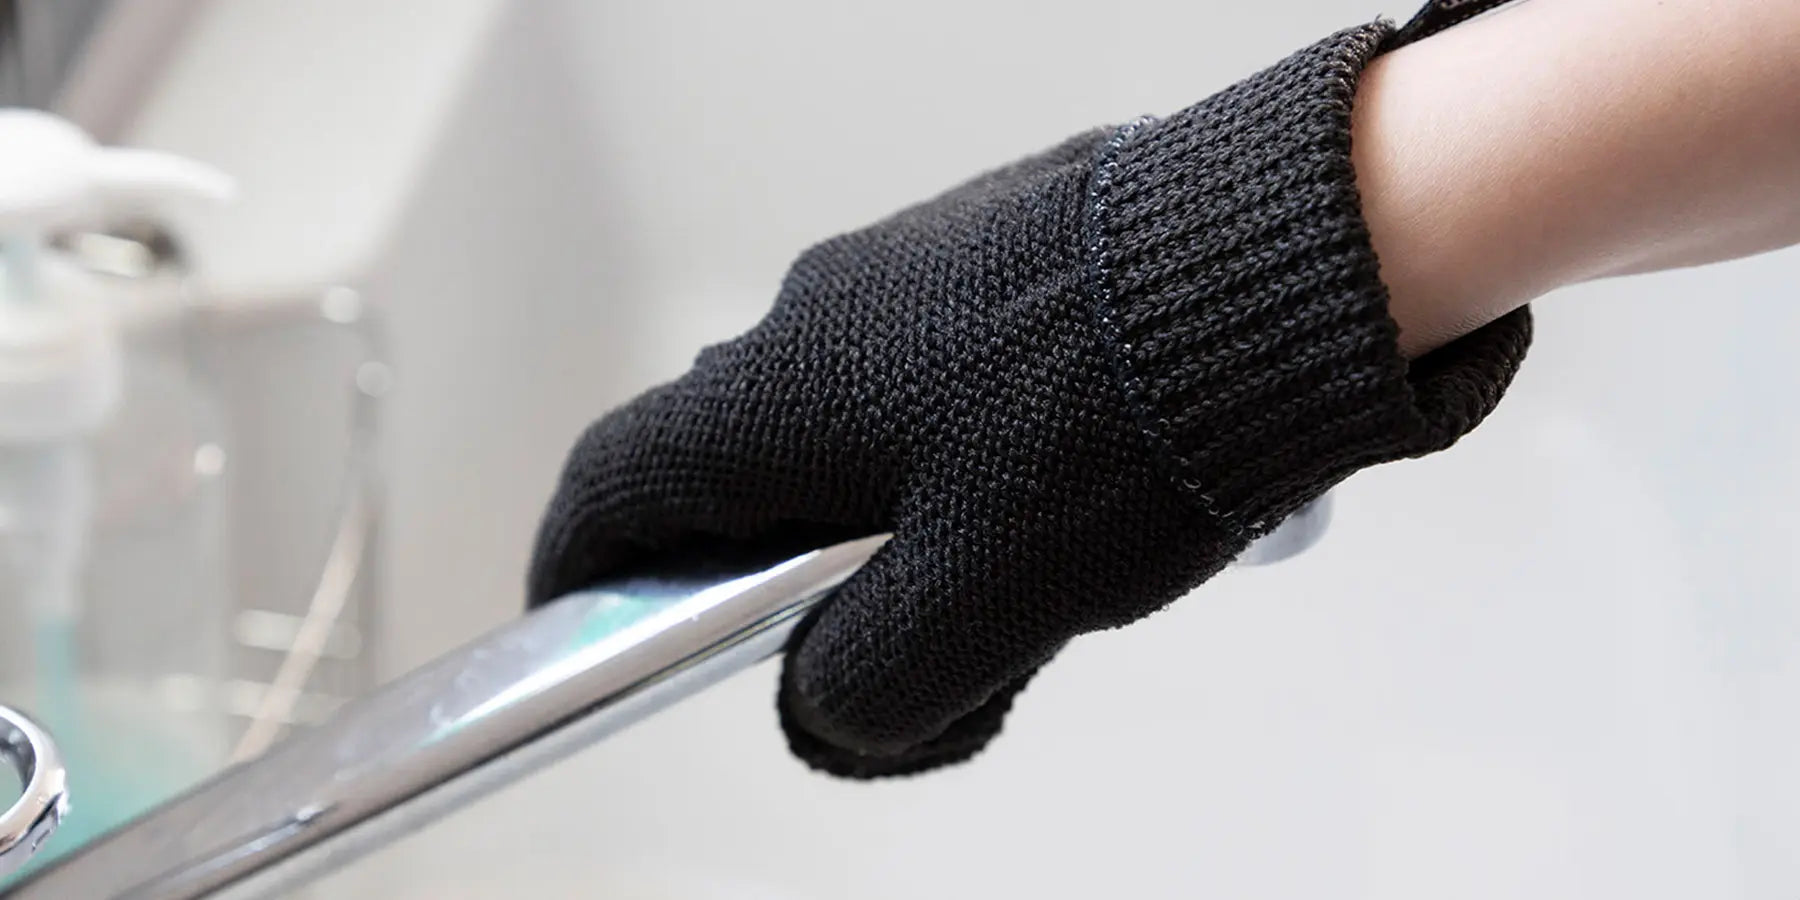 Discover our great selection of Cleaning Gloves at Globalkitchen Japan.